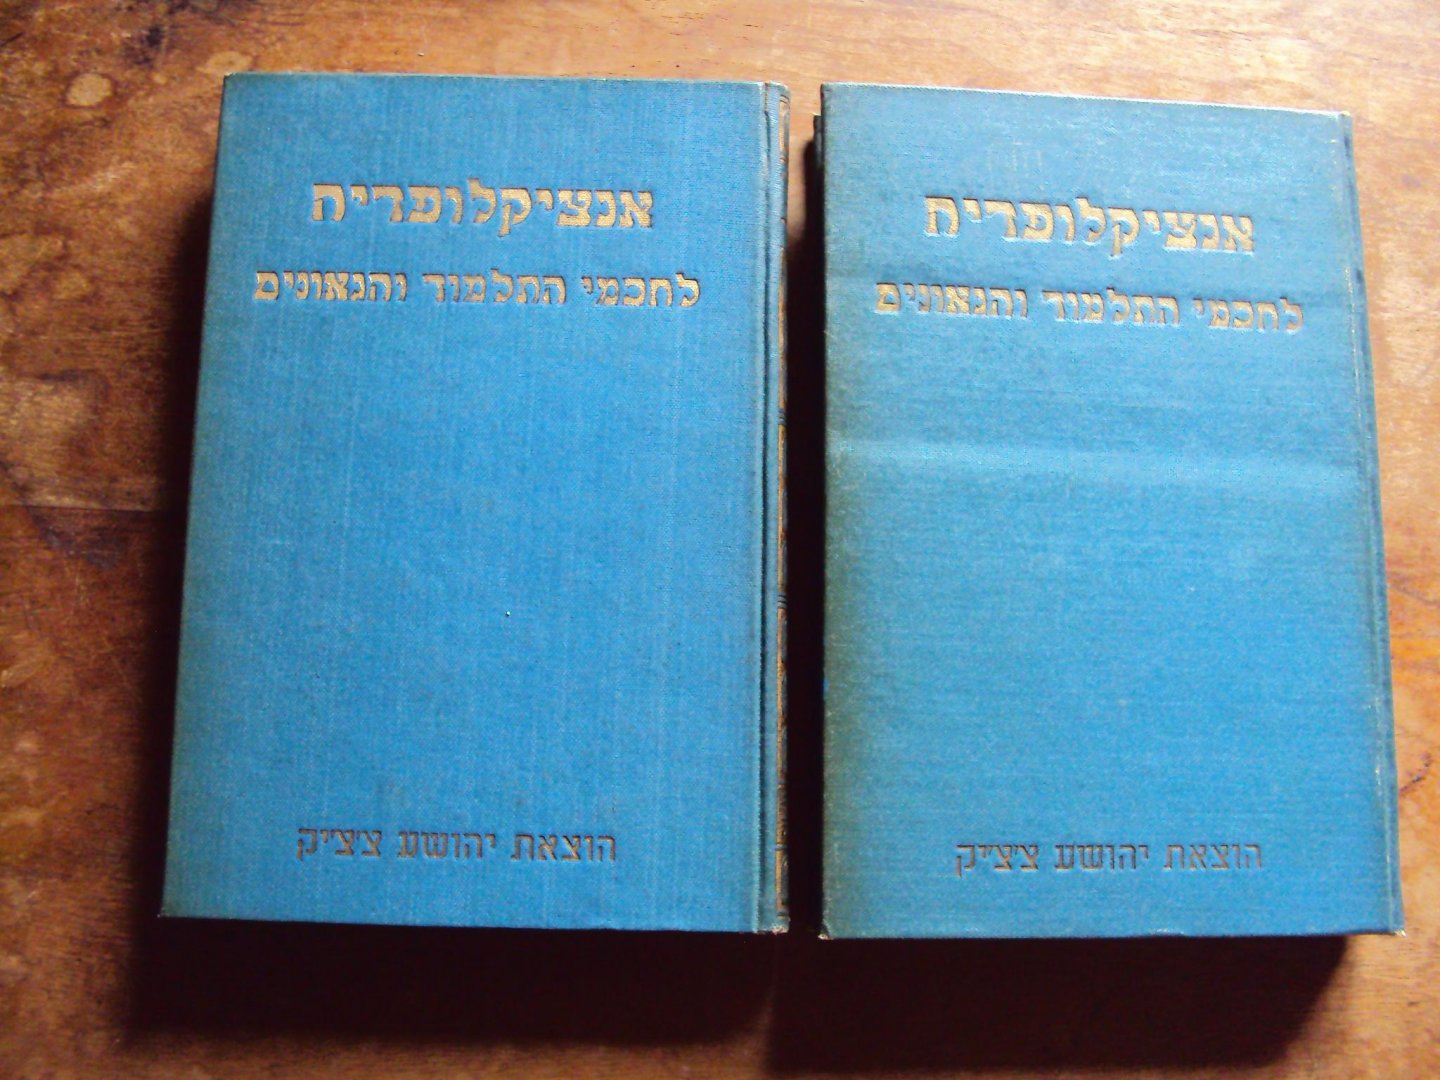 Margalioth, Mordechai (ed.) - Encyclopedia of Talmudic and Geonic Literature, being a Biographical Dictionary of the Tanaim, Amoraim and Geonim